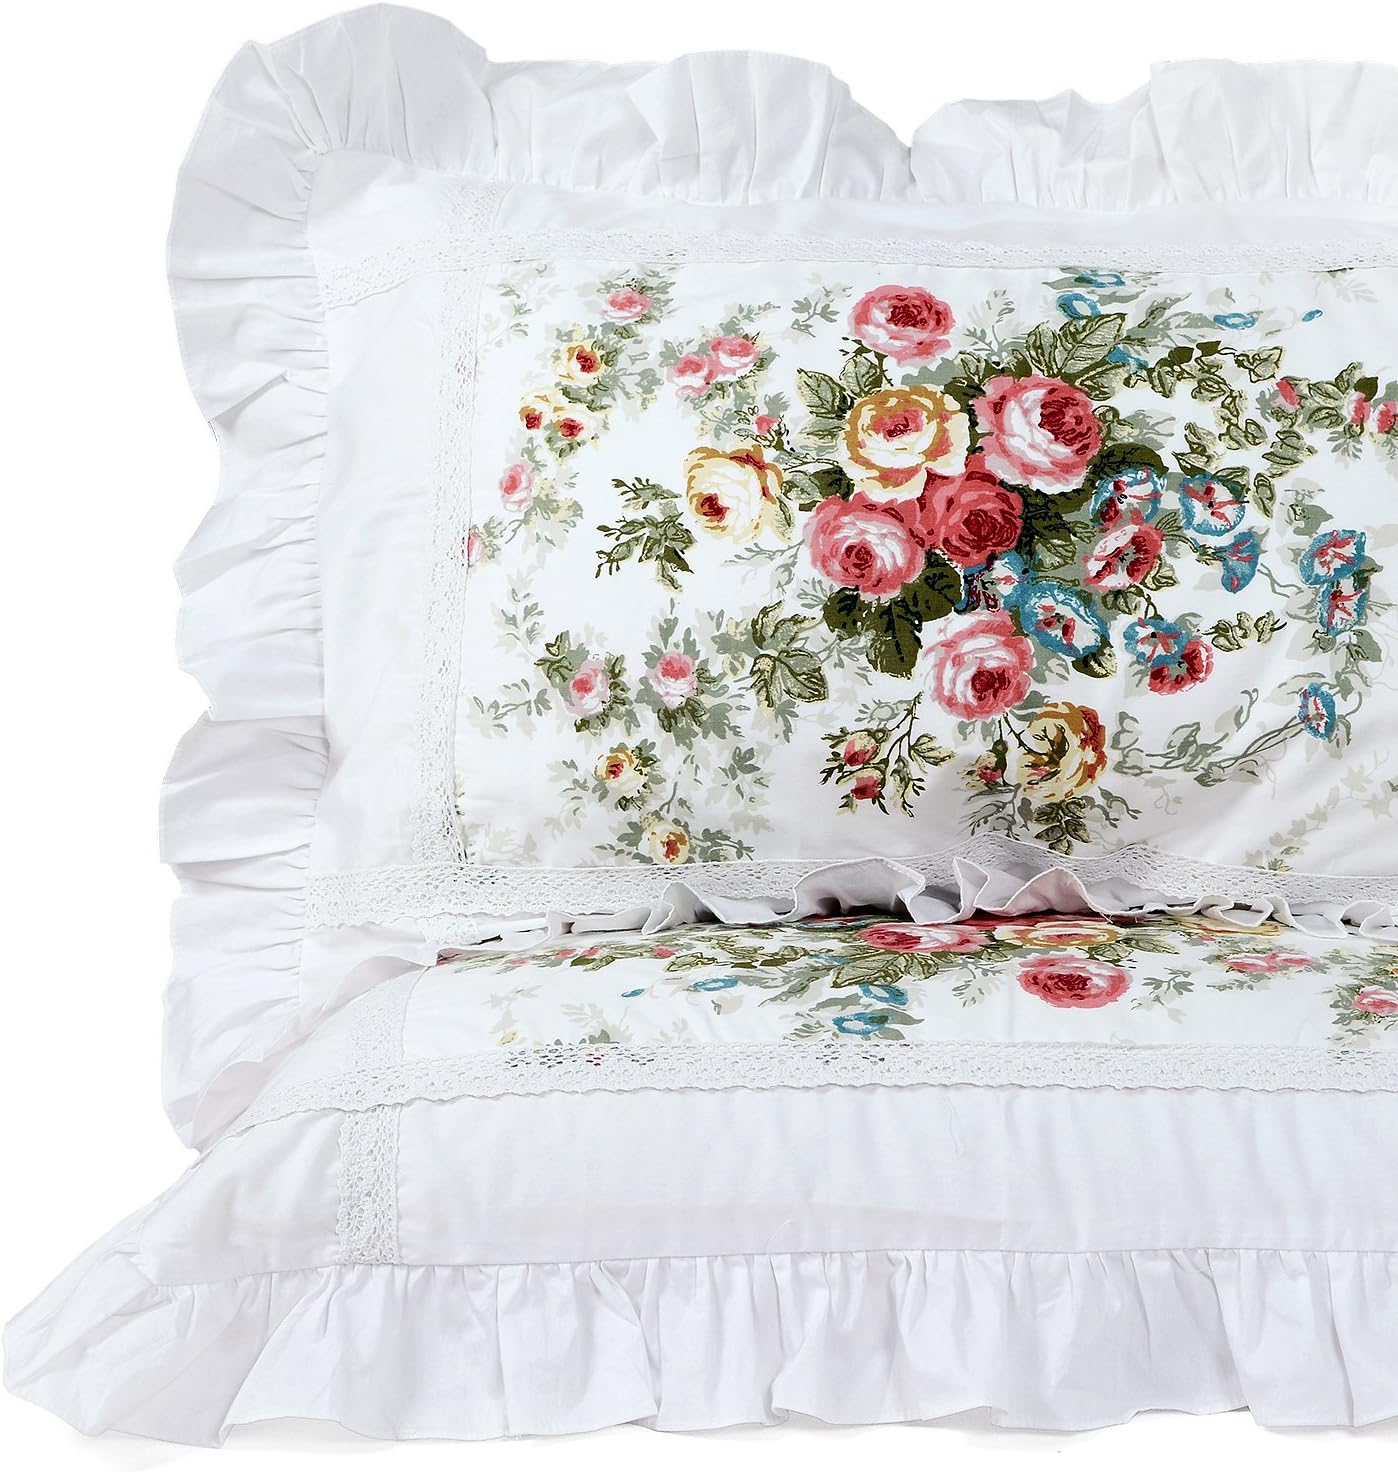 FADFAY Shabby Pink Rose Floral Print Pillowcases Elegant Country Style Vintage Lace Ruffles Bedding Pillow Covers Standard Size 19 x 29 (Twin/Full/Queen, Vintage Rose)